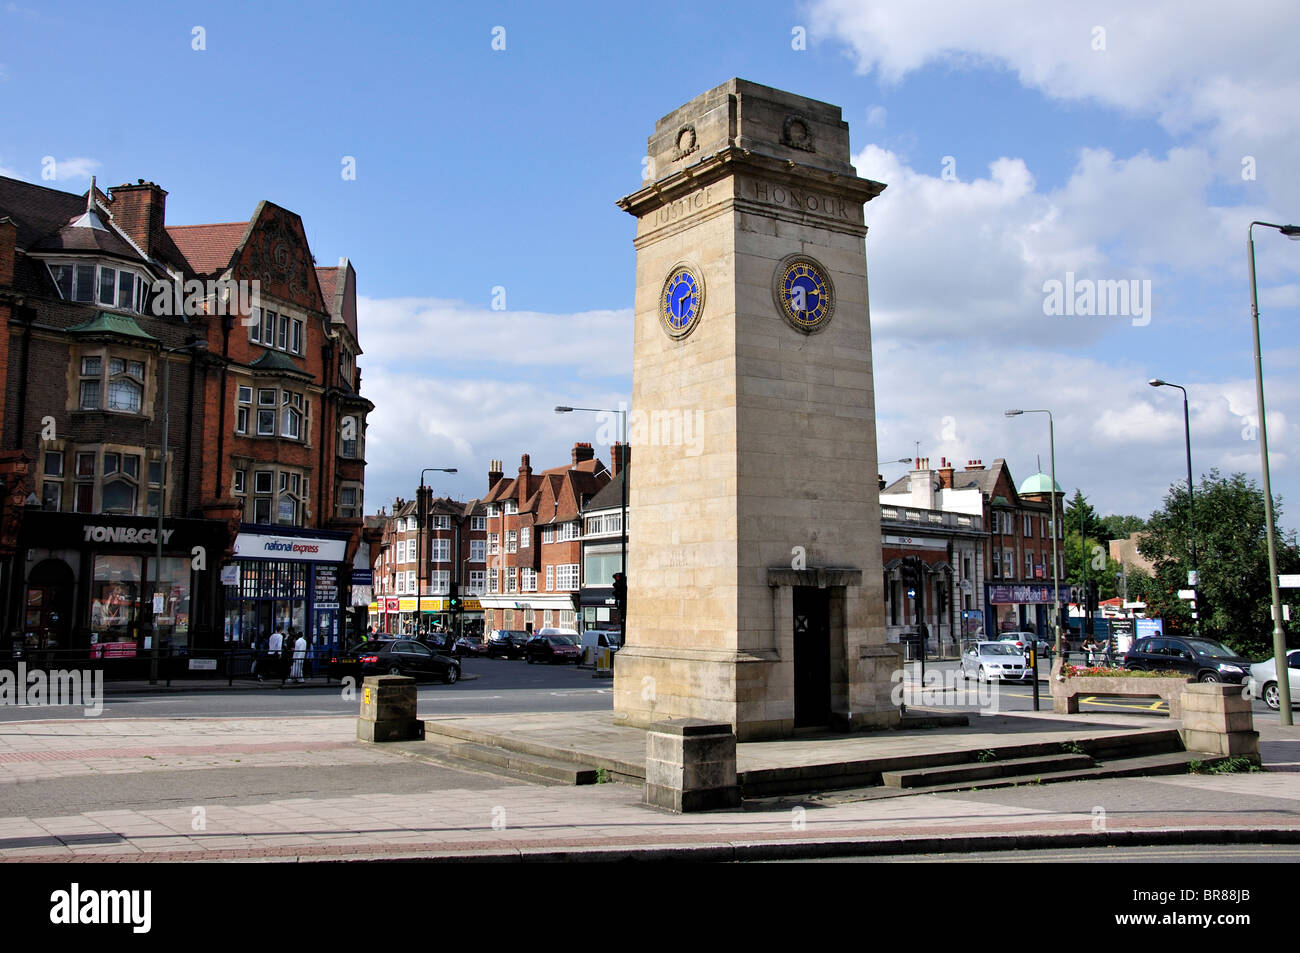 The Clock Tower, Finchley Road, Golders Green, London Borough of Barnet, Greater London, England, United Kingdom Stock Photo